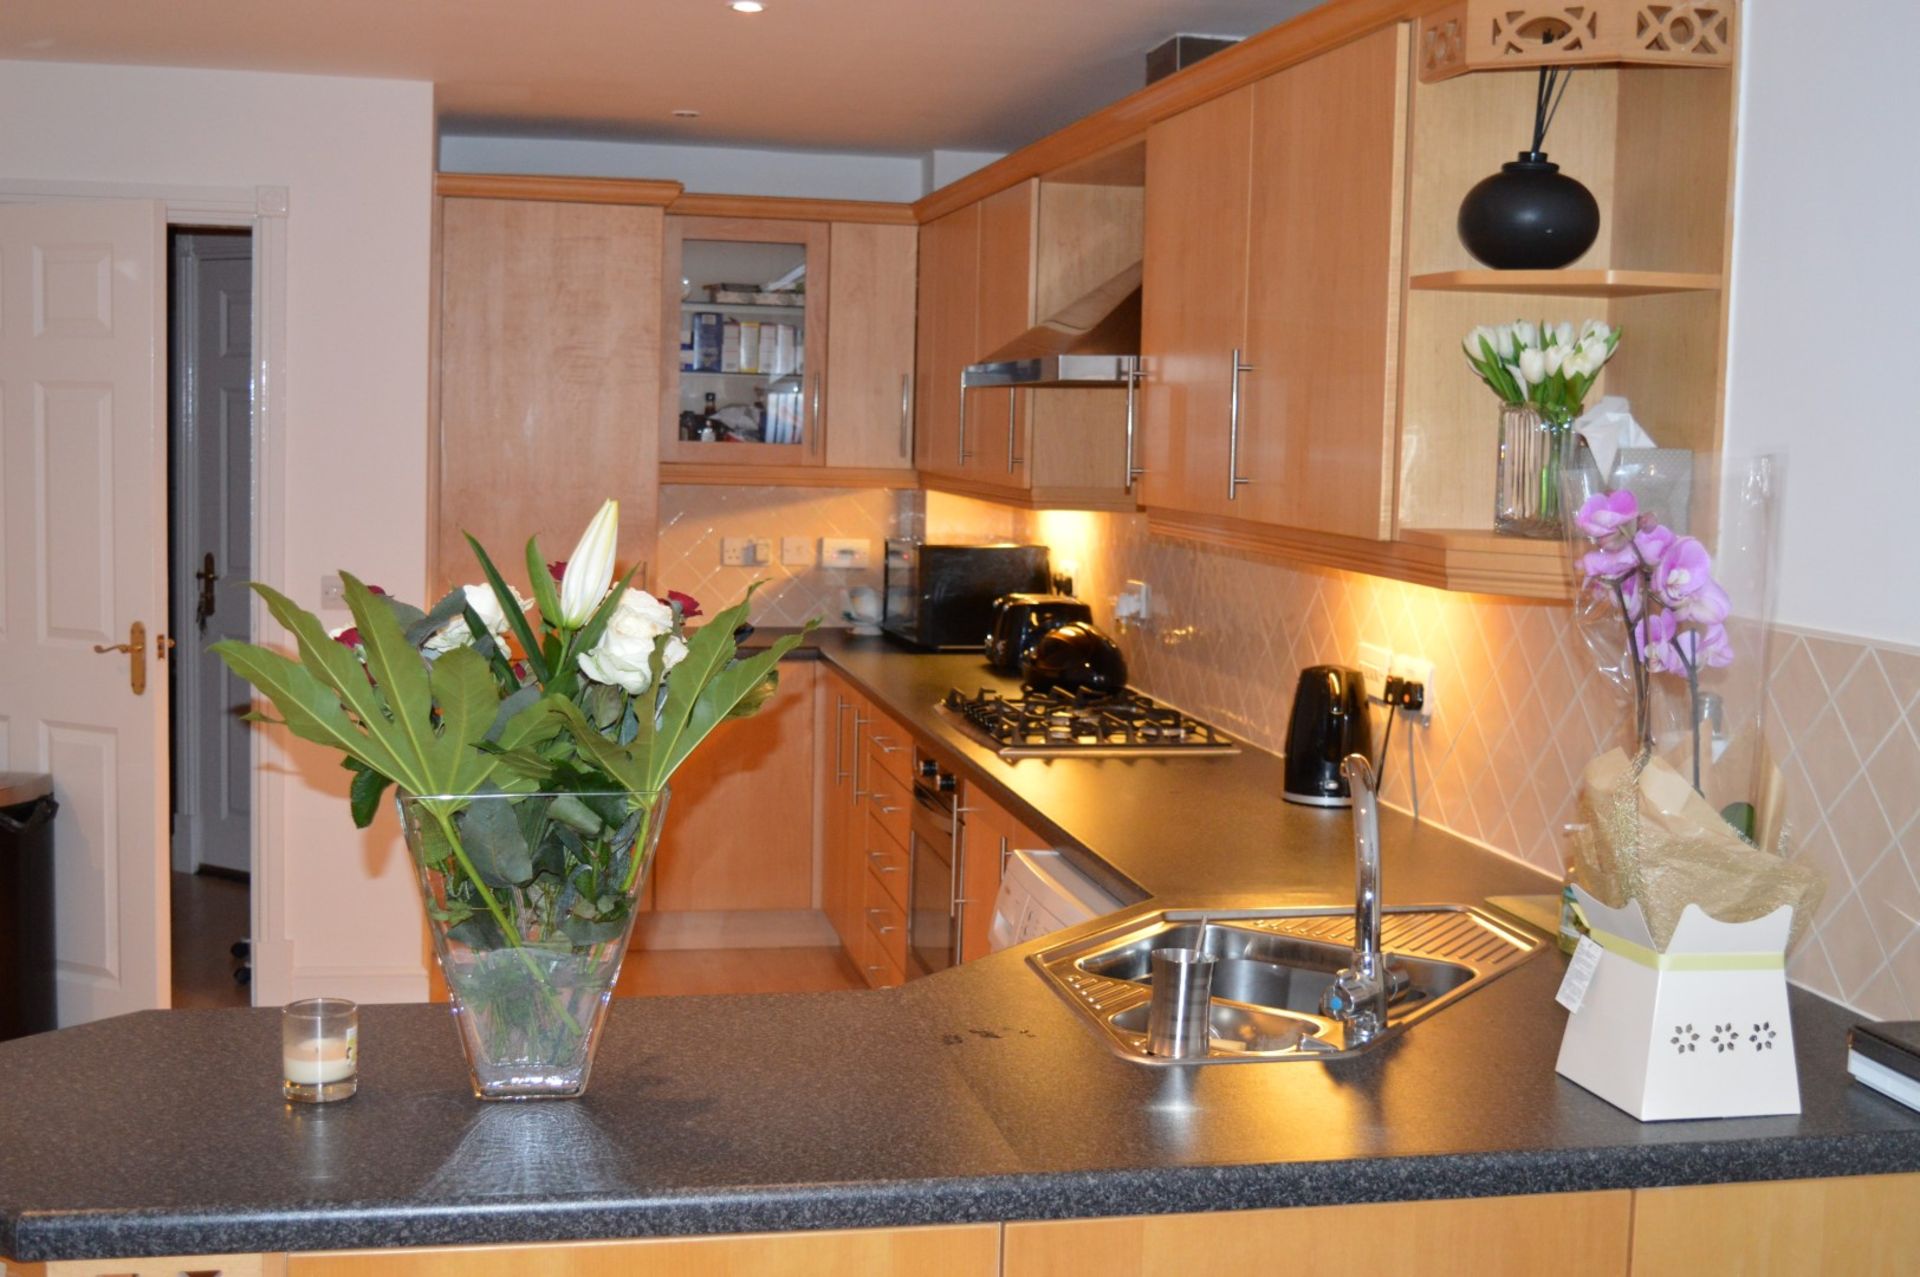 1 x Manor Cabinet Company Fitted Kitchen - Contemporary Beech Finish With Black Worktops and - Image 5 of 47